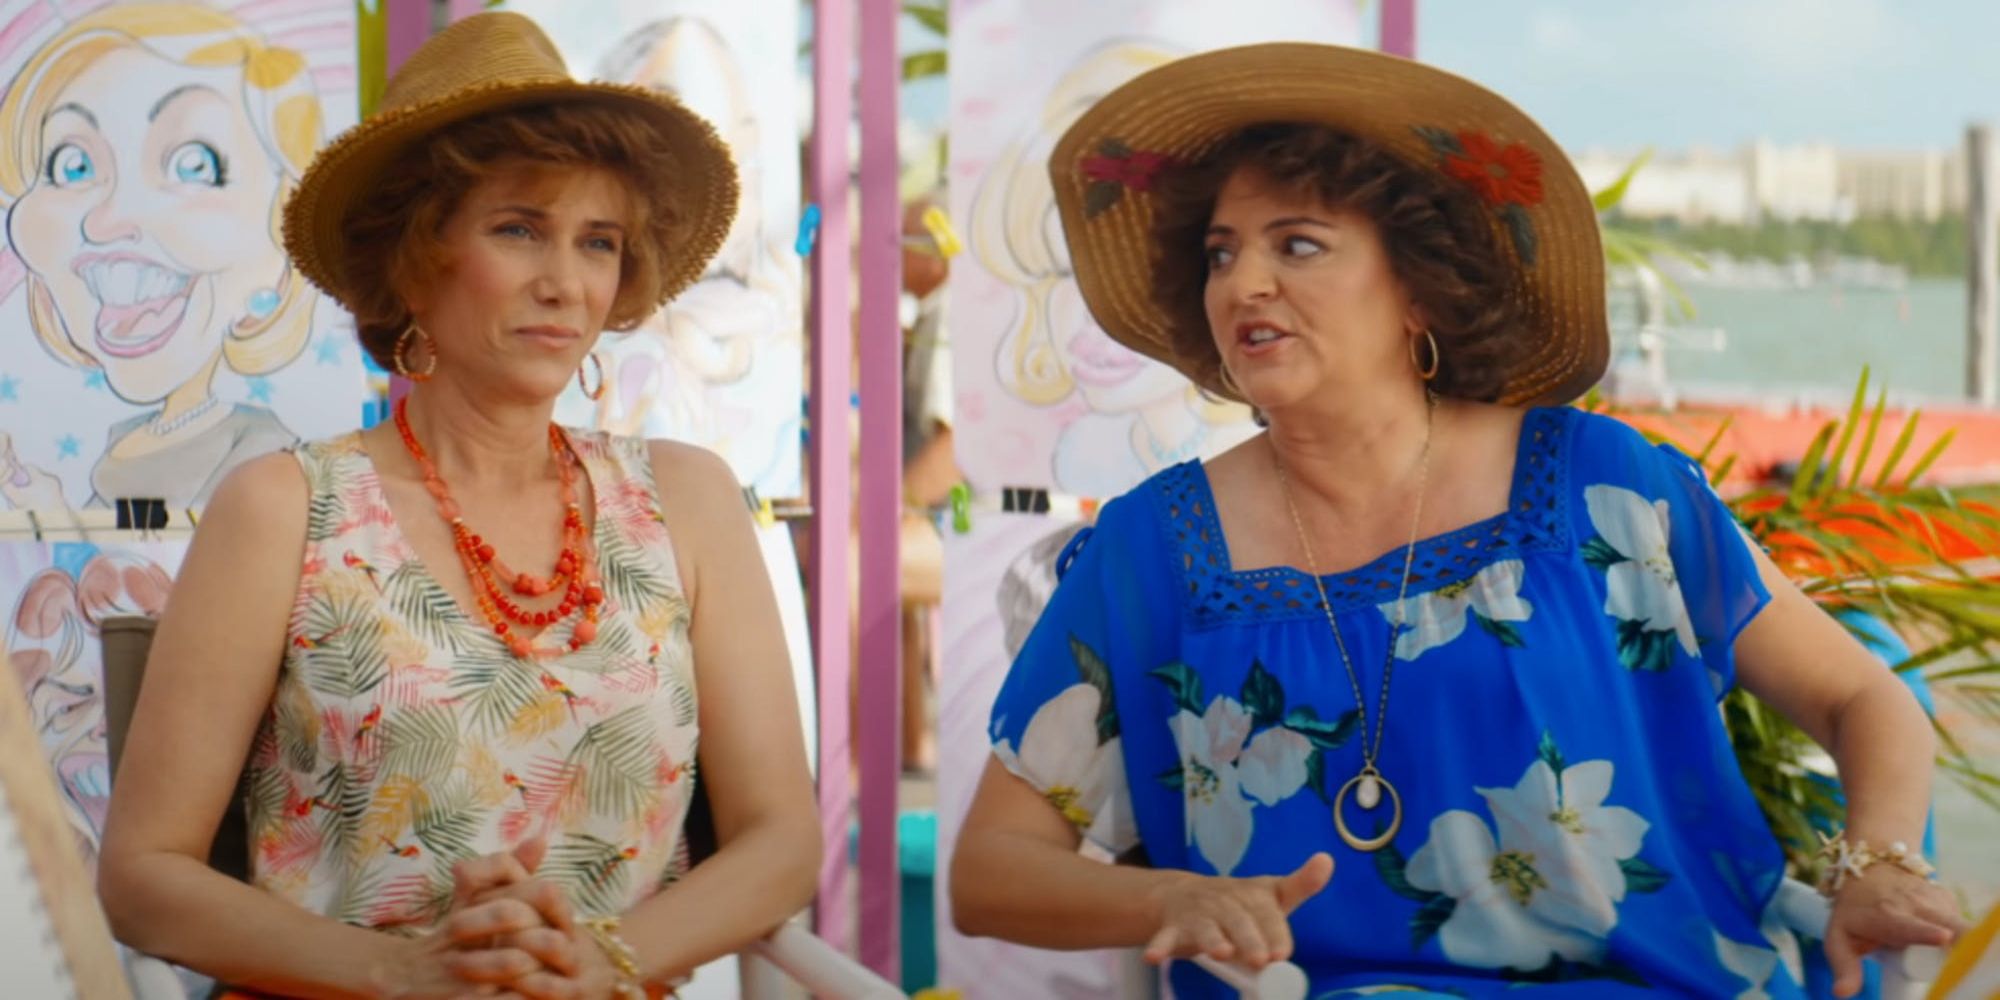 The titular characters from the 2021 comedy film Barb and Star Go To Vista Del Mar.